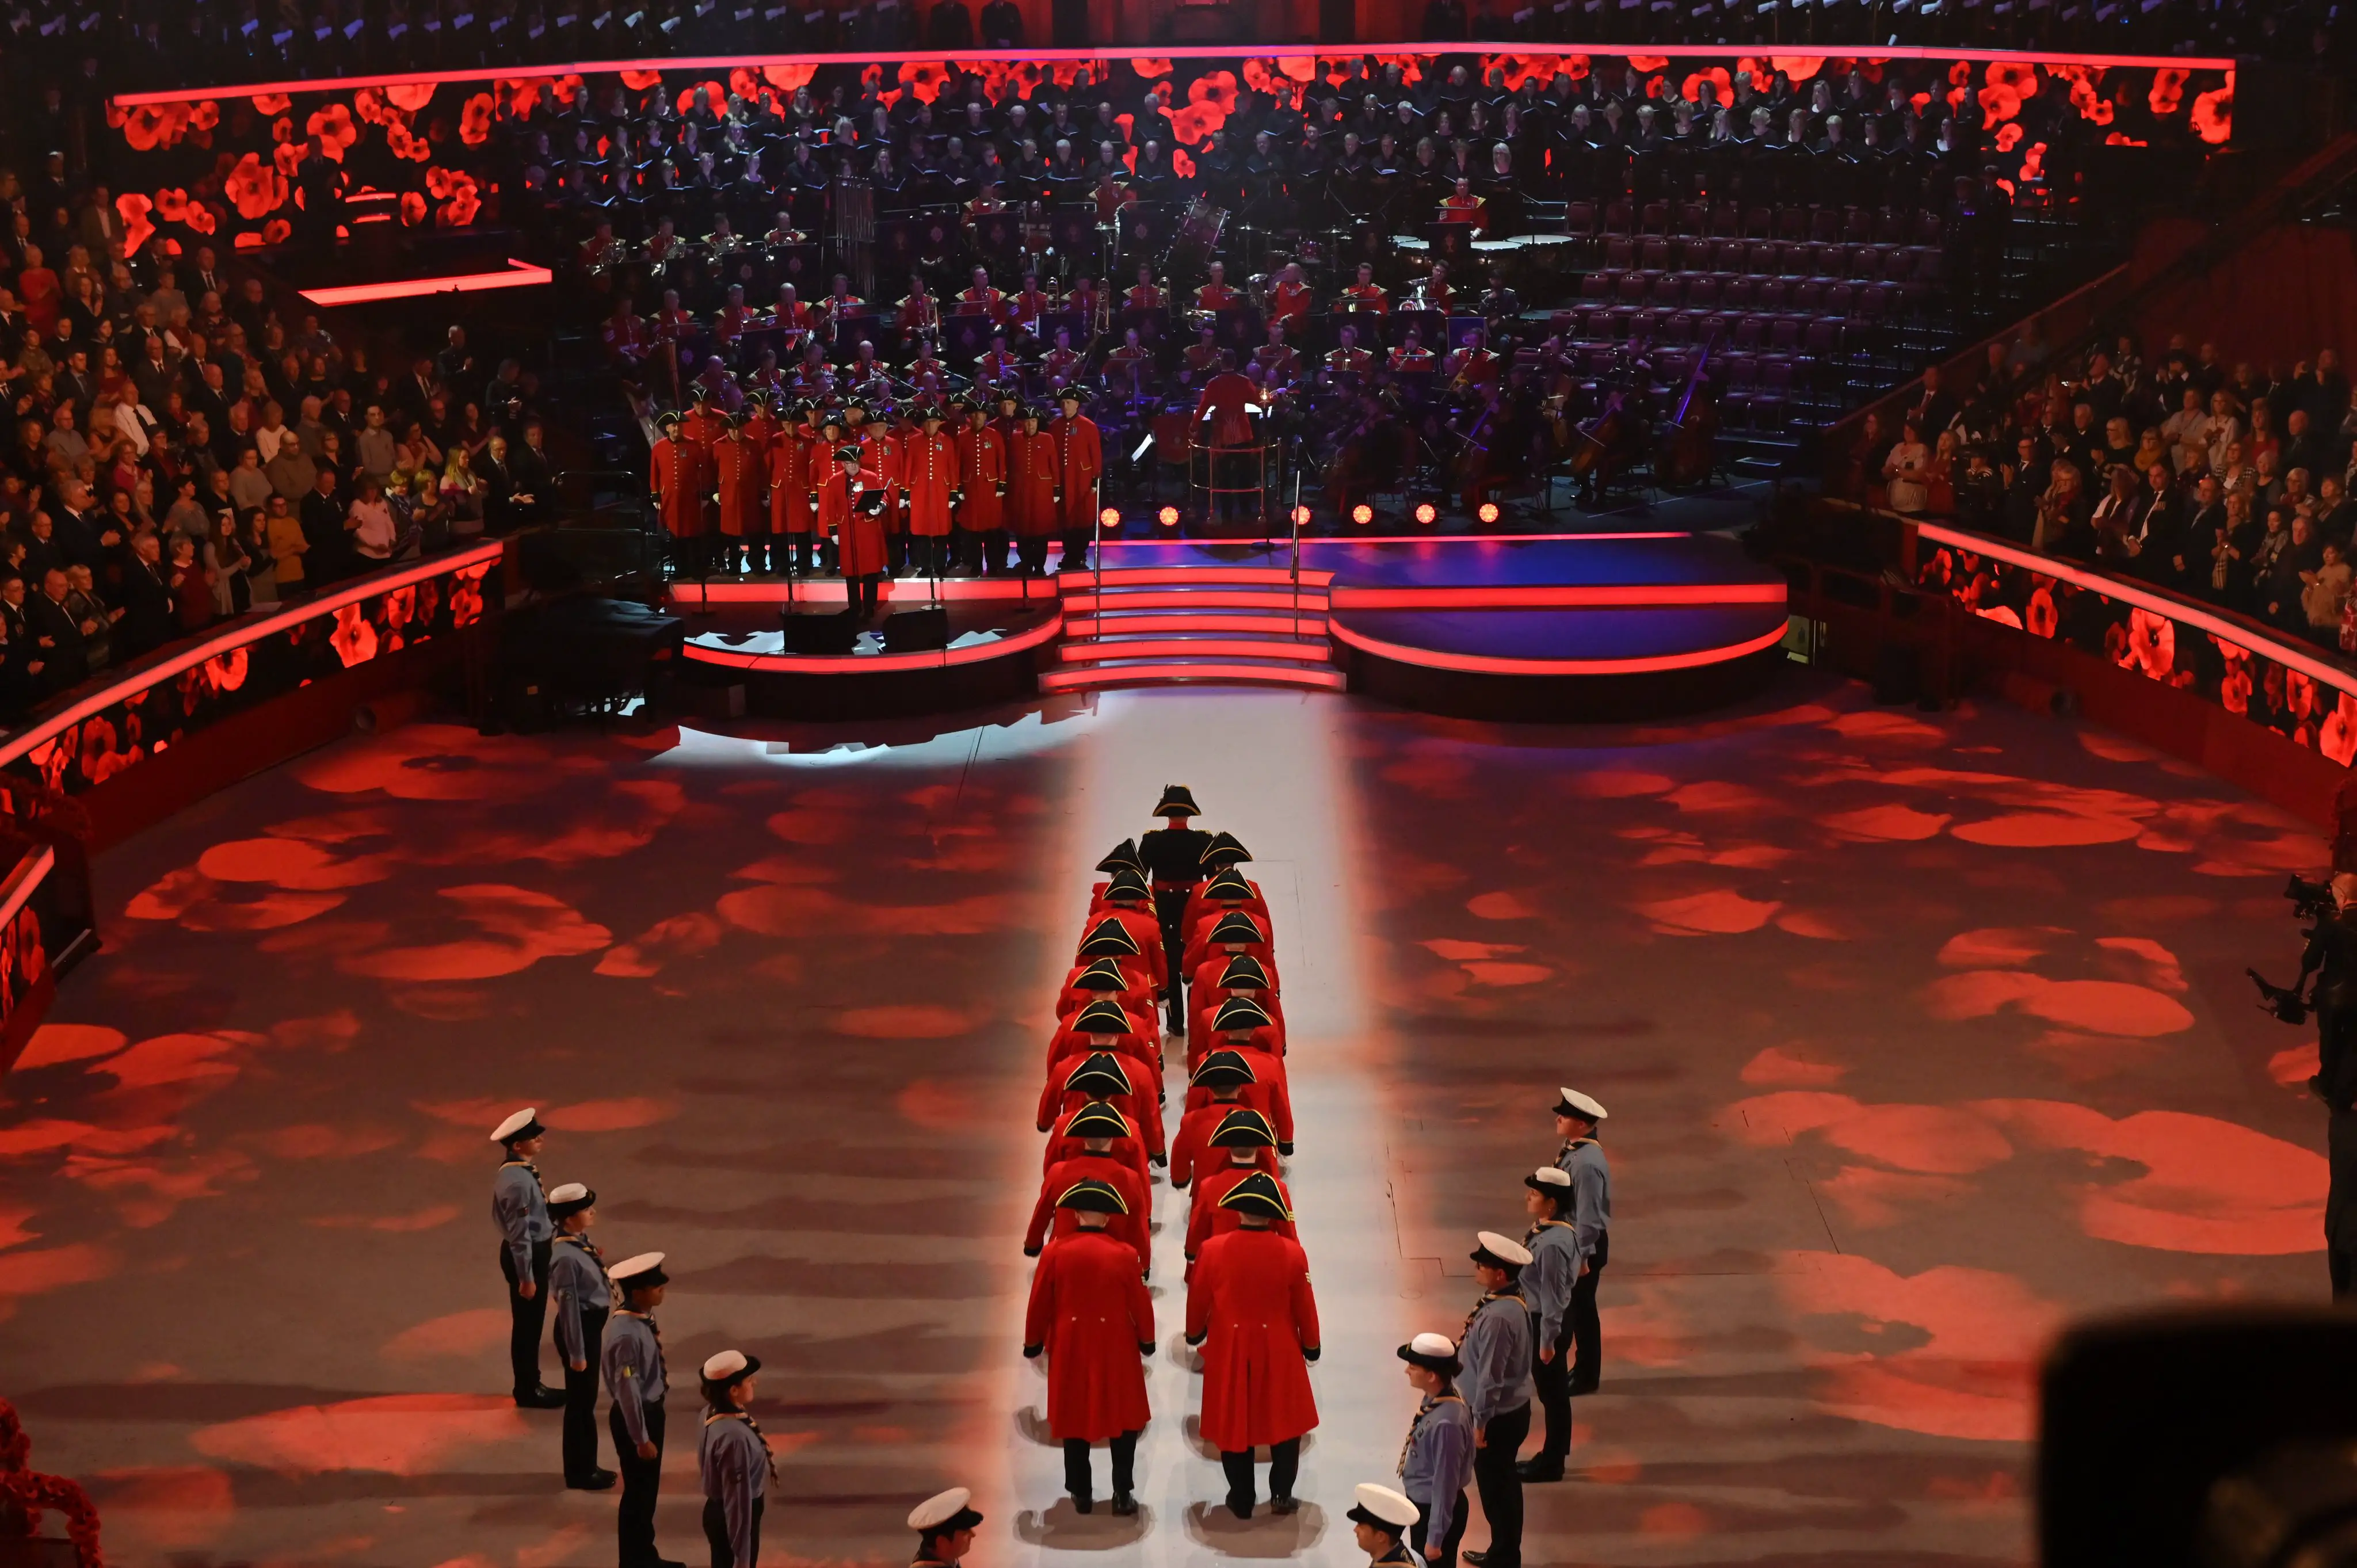 The Royal Festival of Remembrance is an annual event held every year in November before Remembrance Sunday